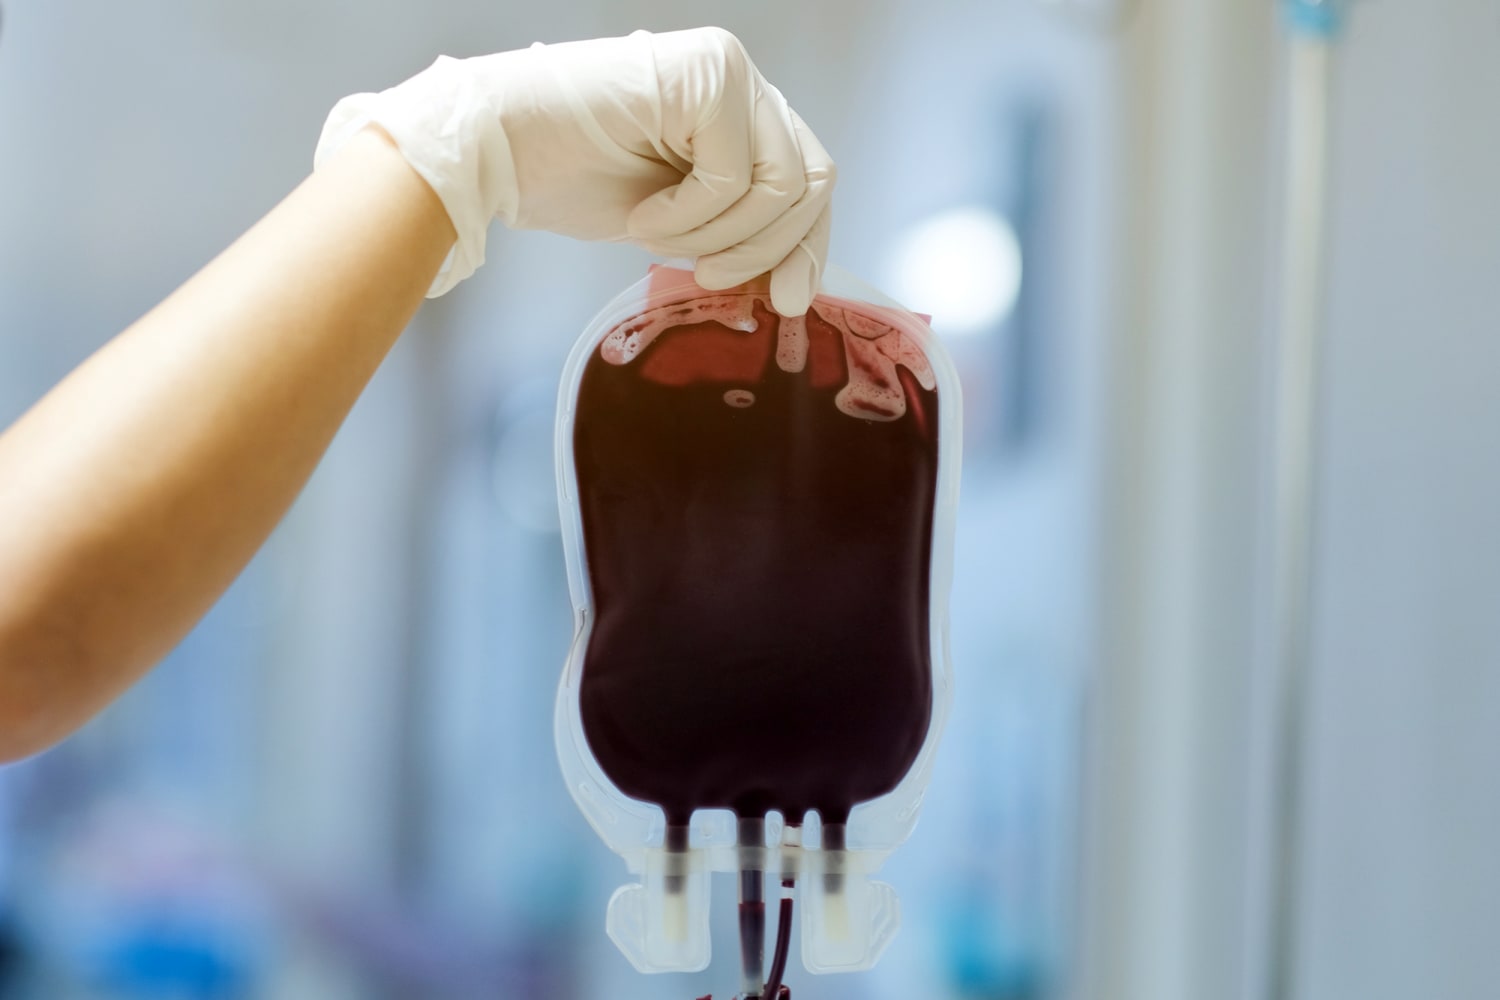 National blood crisis reignites calls for FDA to end gay donor restrictions